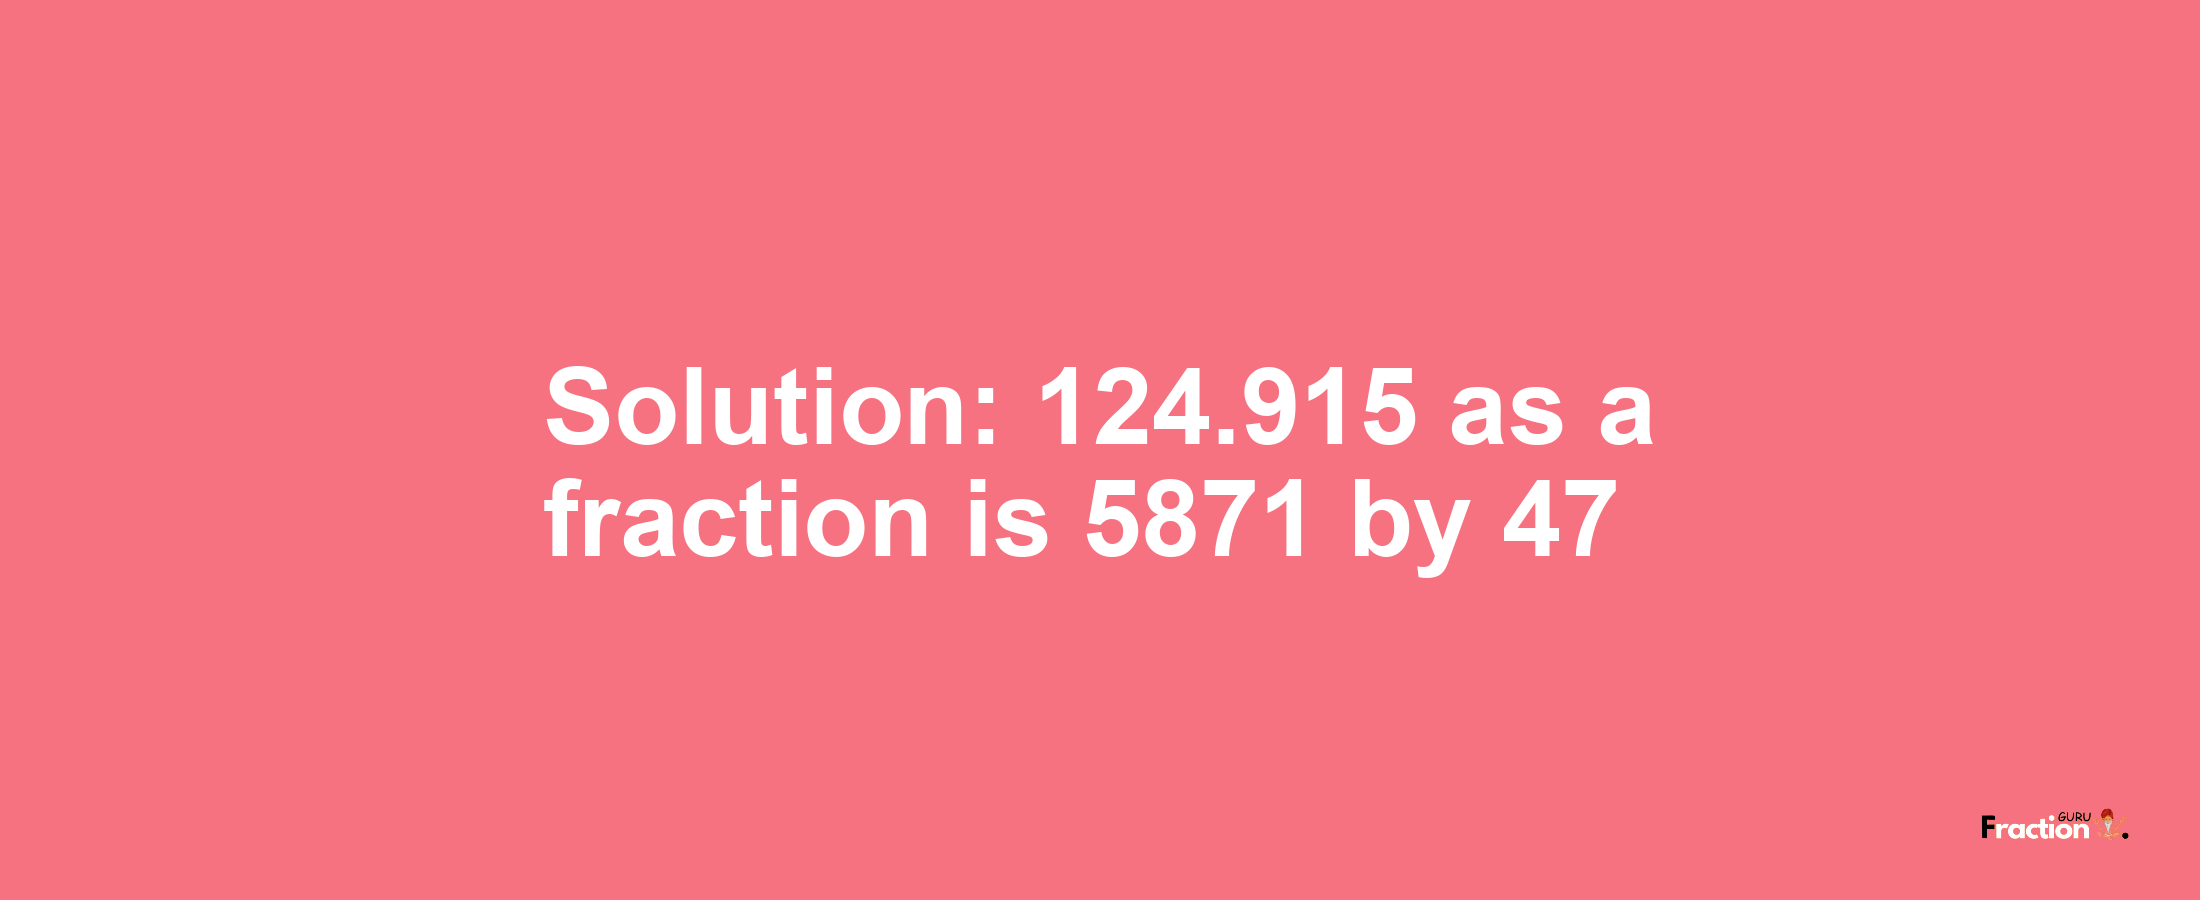 Solution:124.915 as a fraction is 5871/47